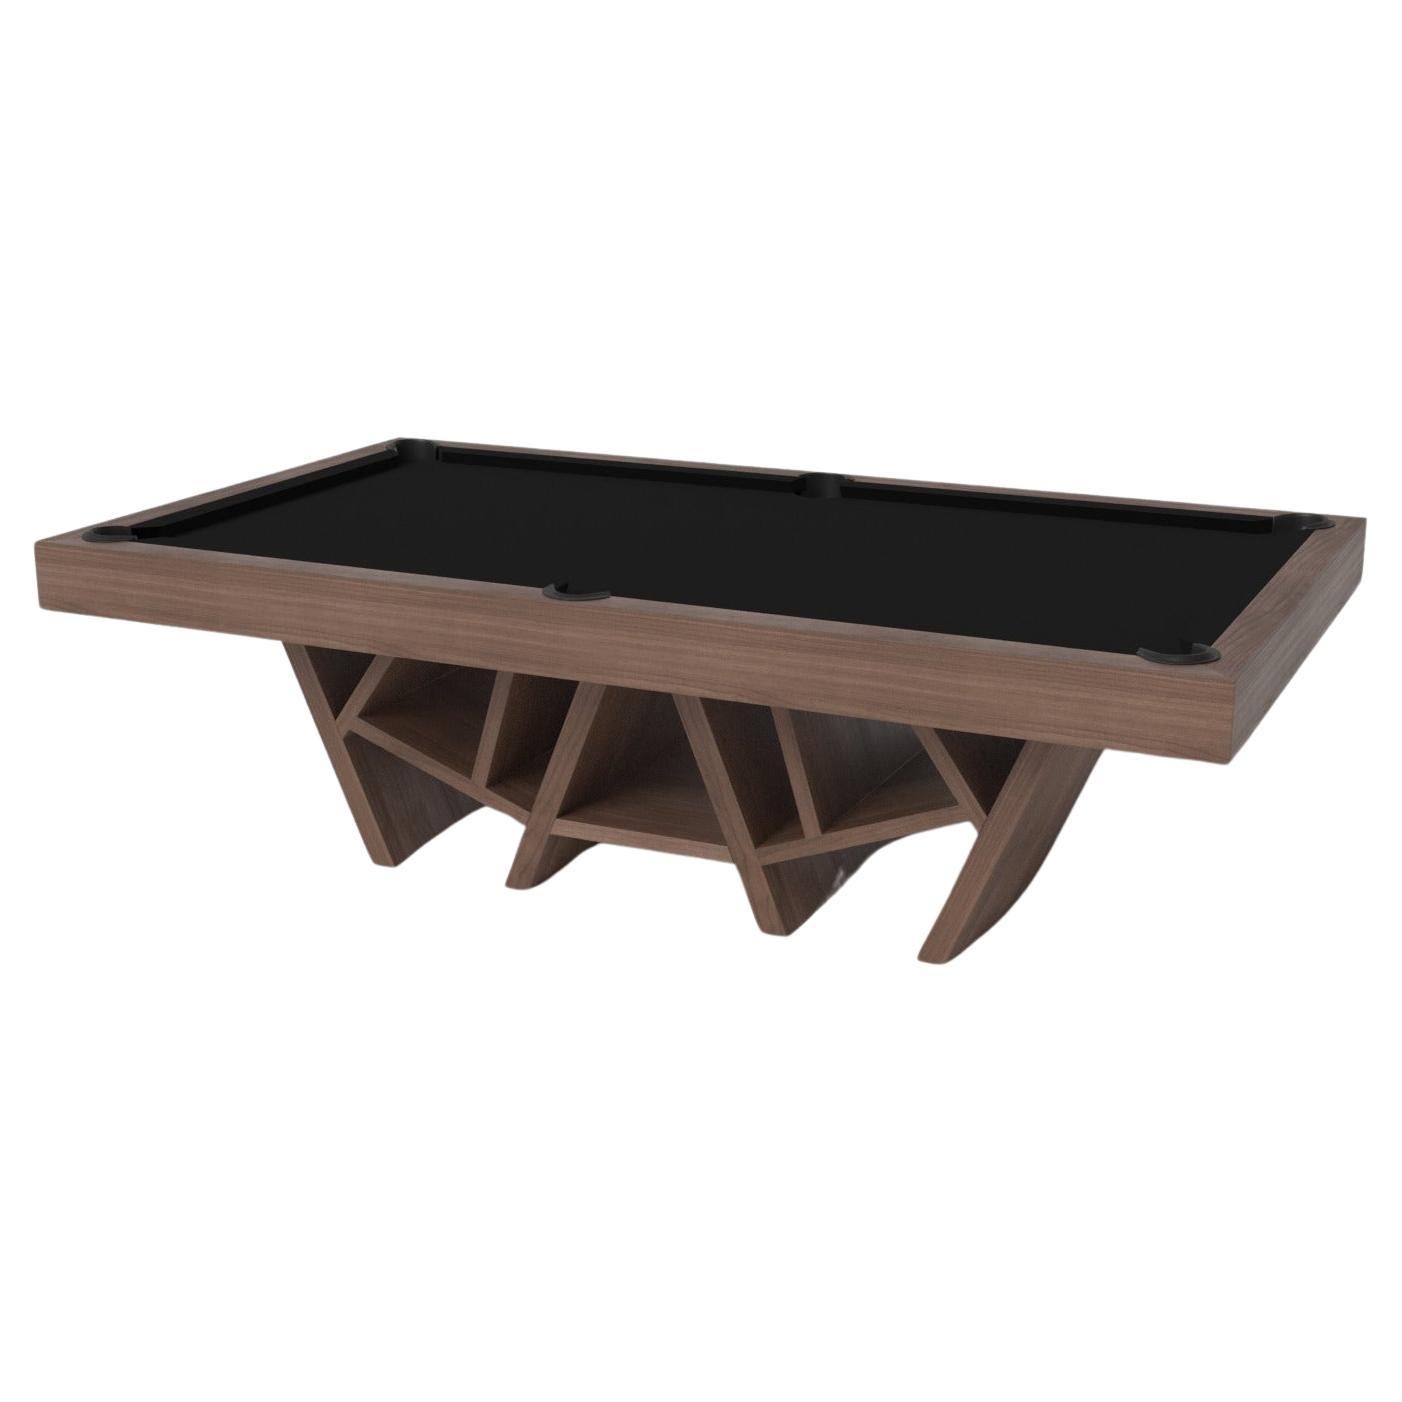 Elevate Customs Maze Pool Table / Solid Walnut Wood in 9' - Made in USA For Sale